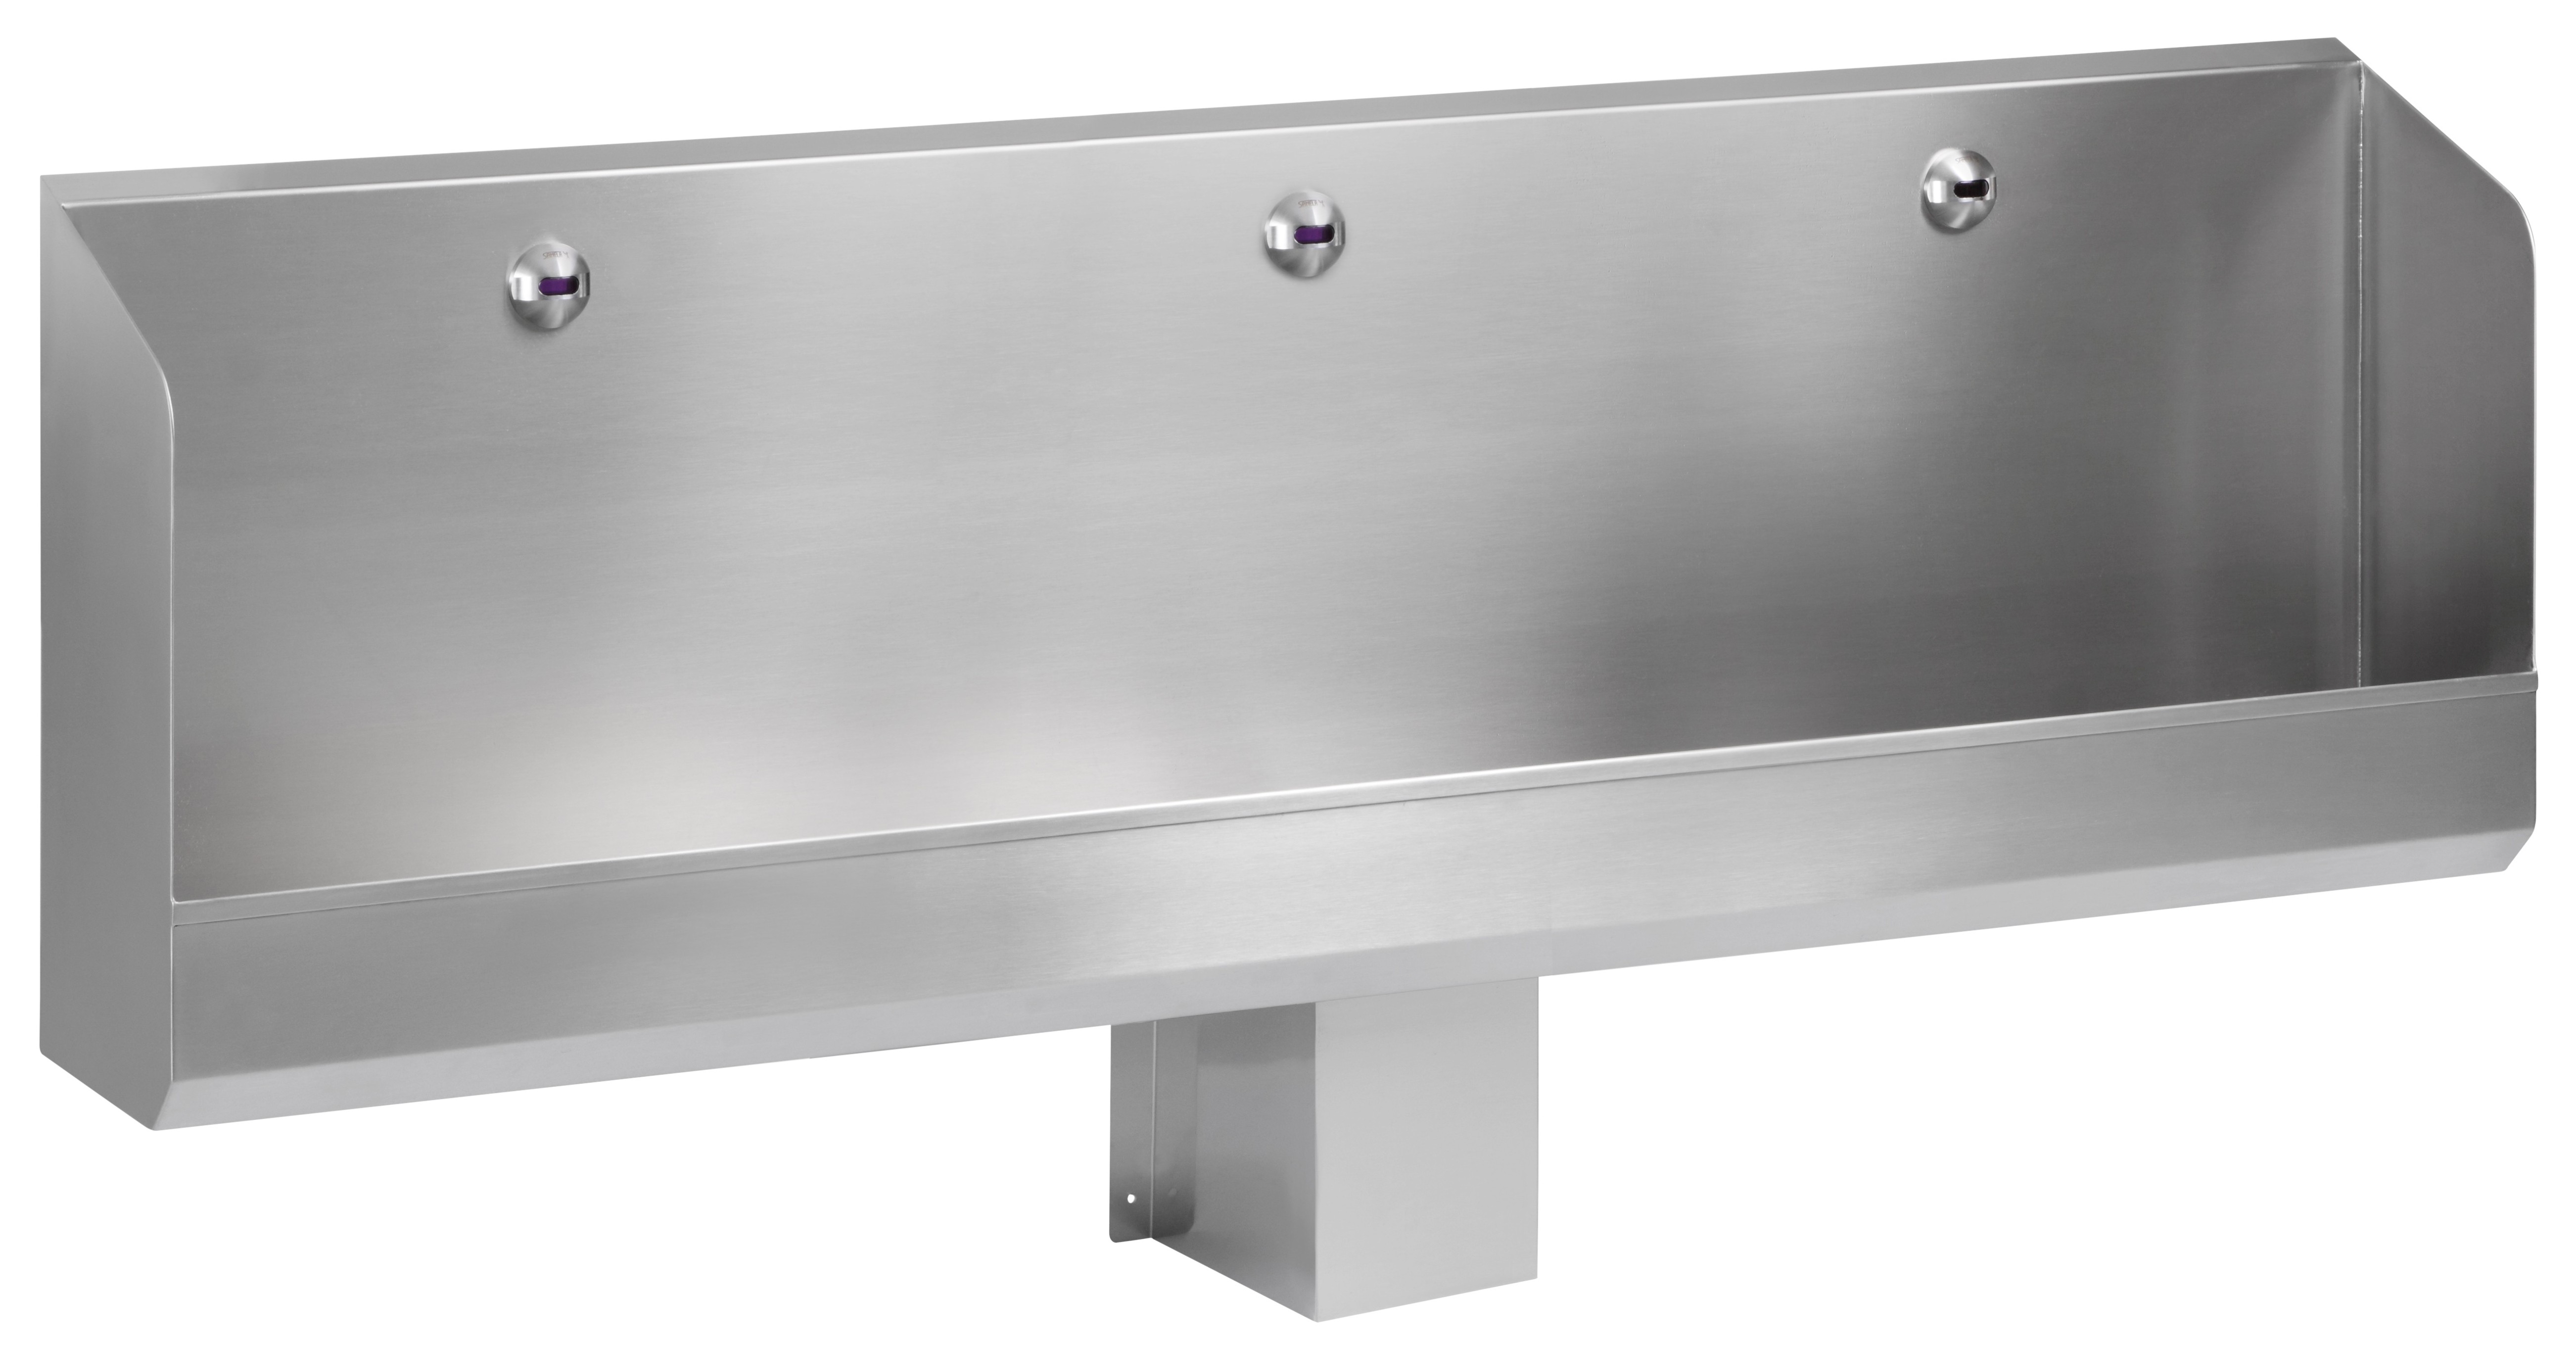 Stainless steel collective urinal